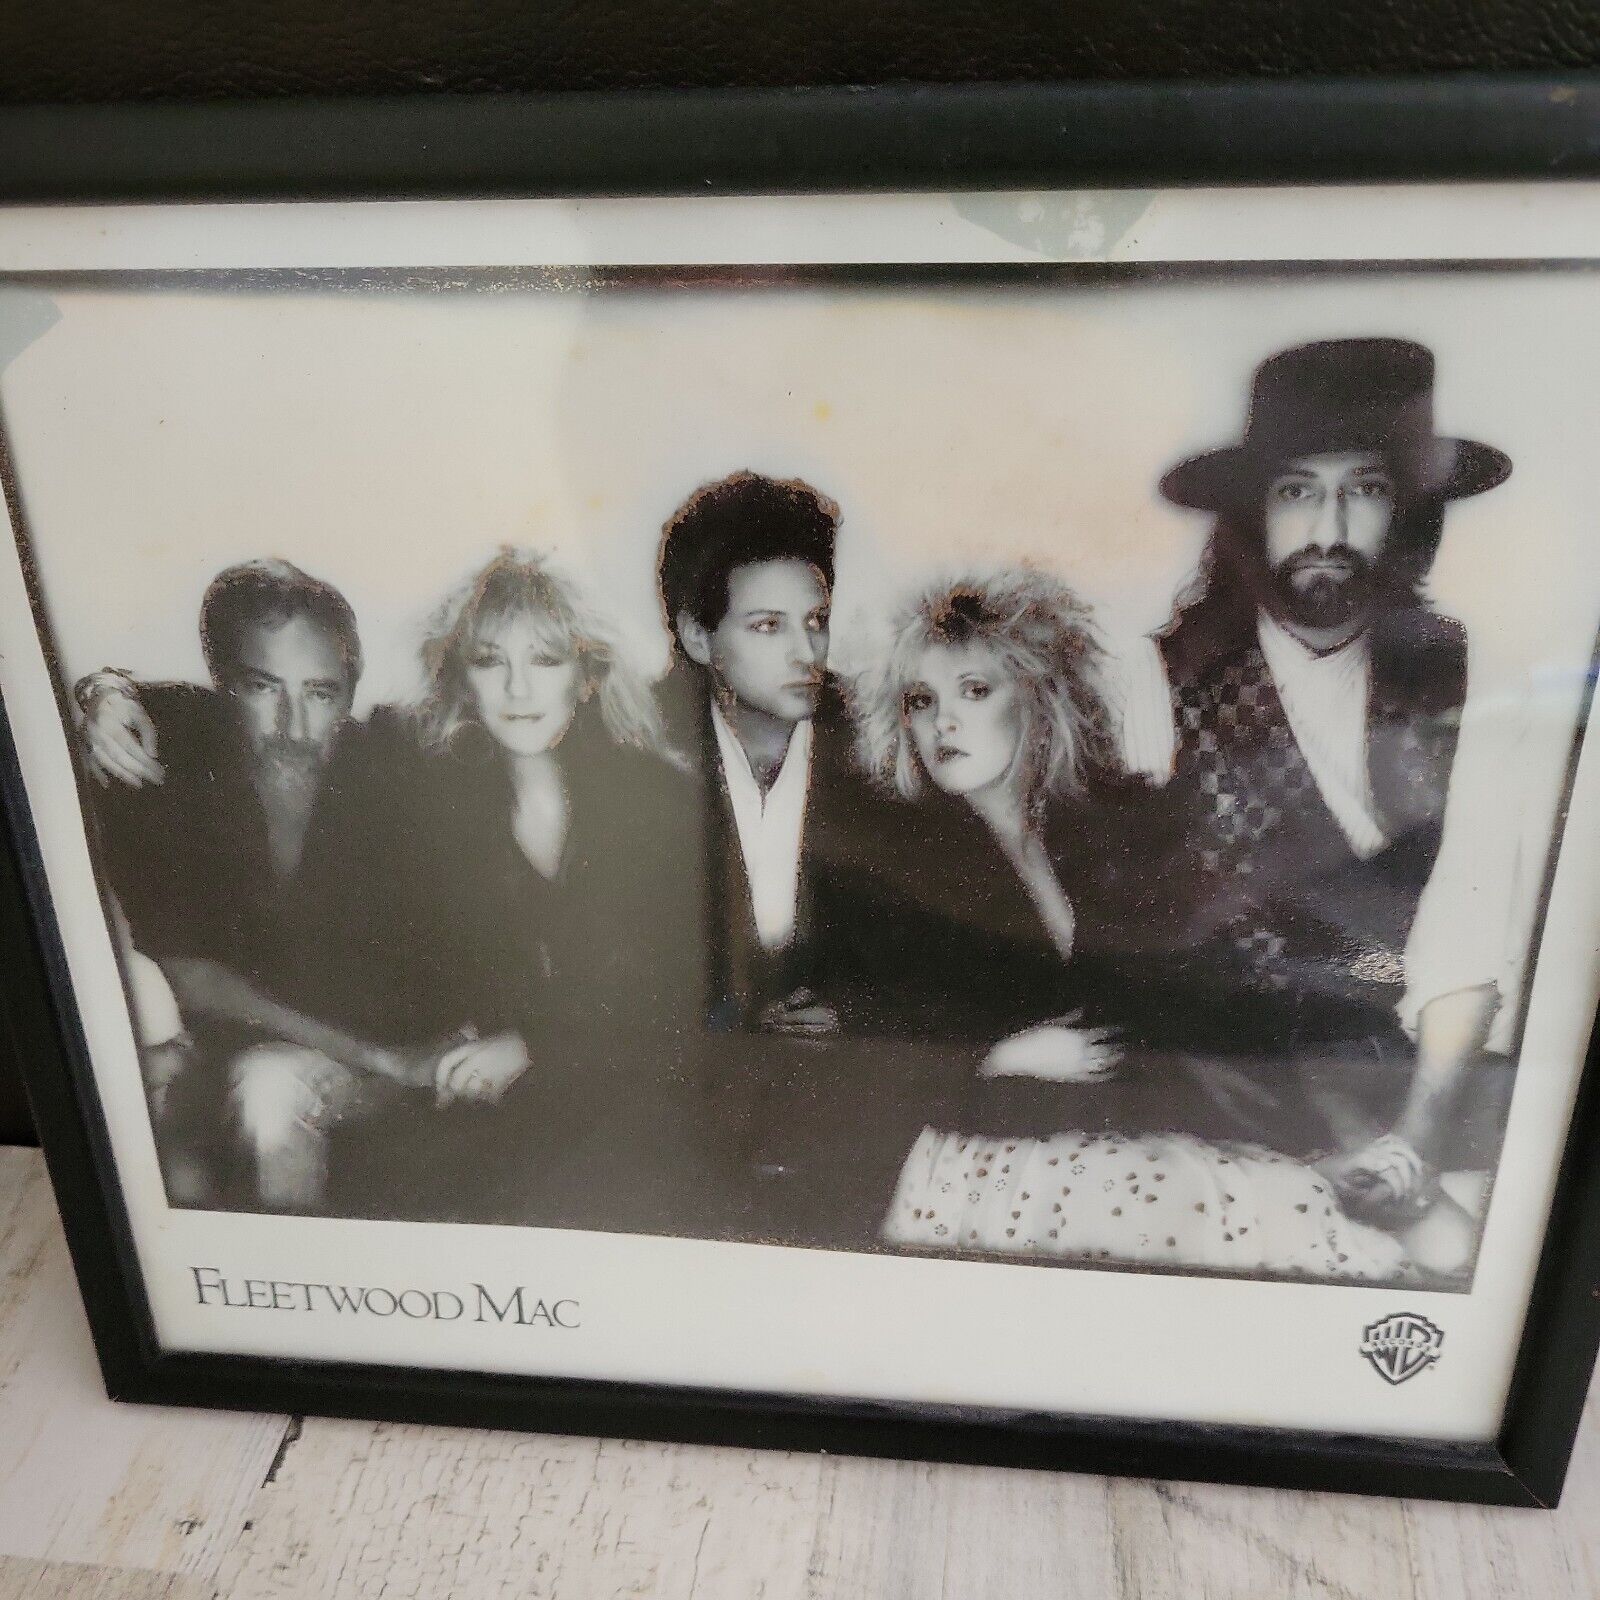 Framed picture Fleetwood Mac logo at bottom, Warner Brothers records. 10x8